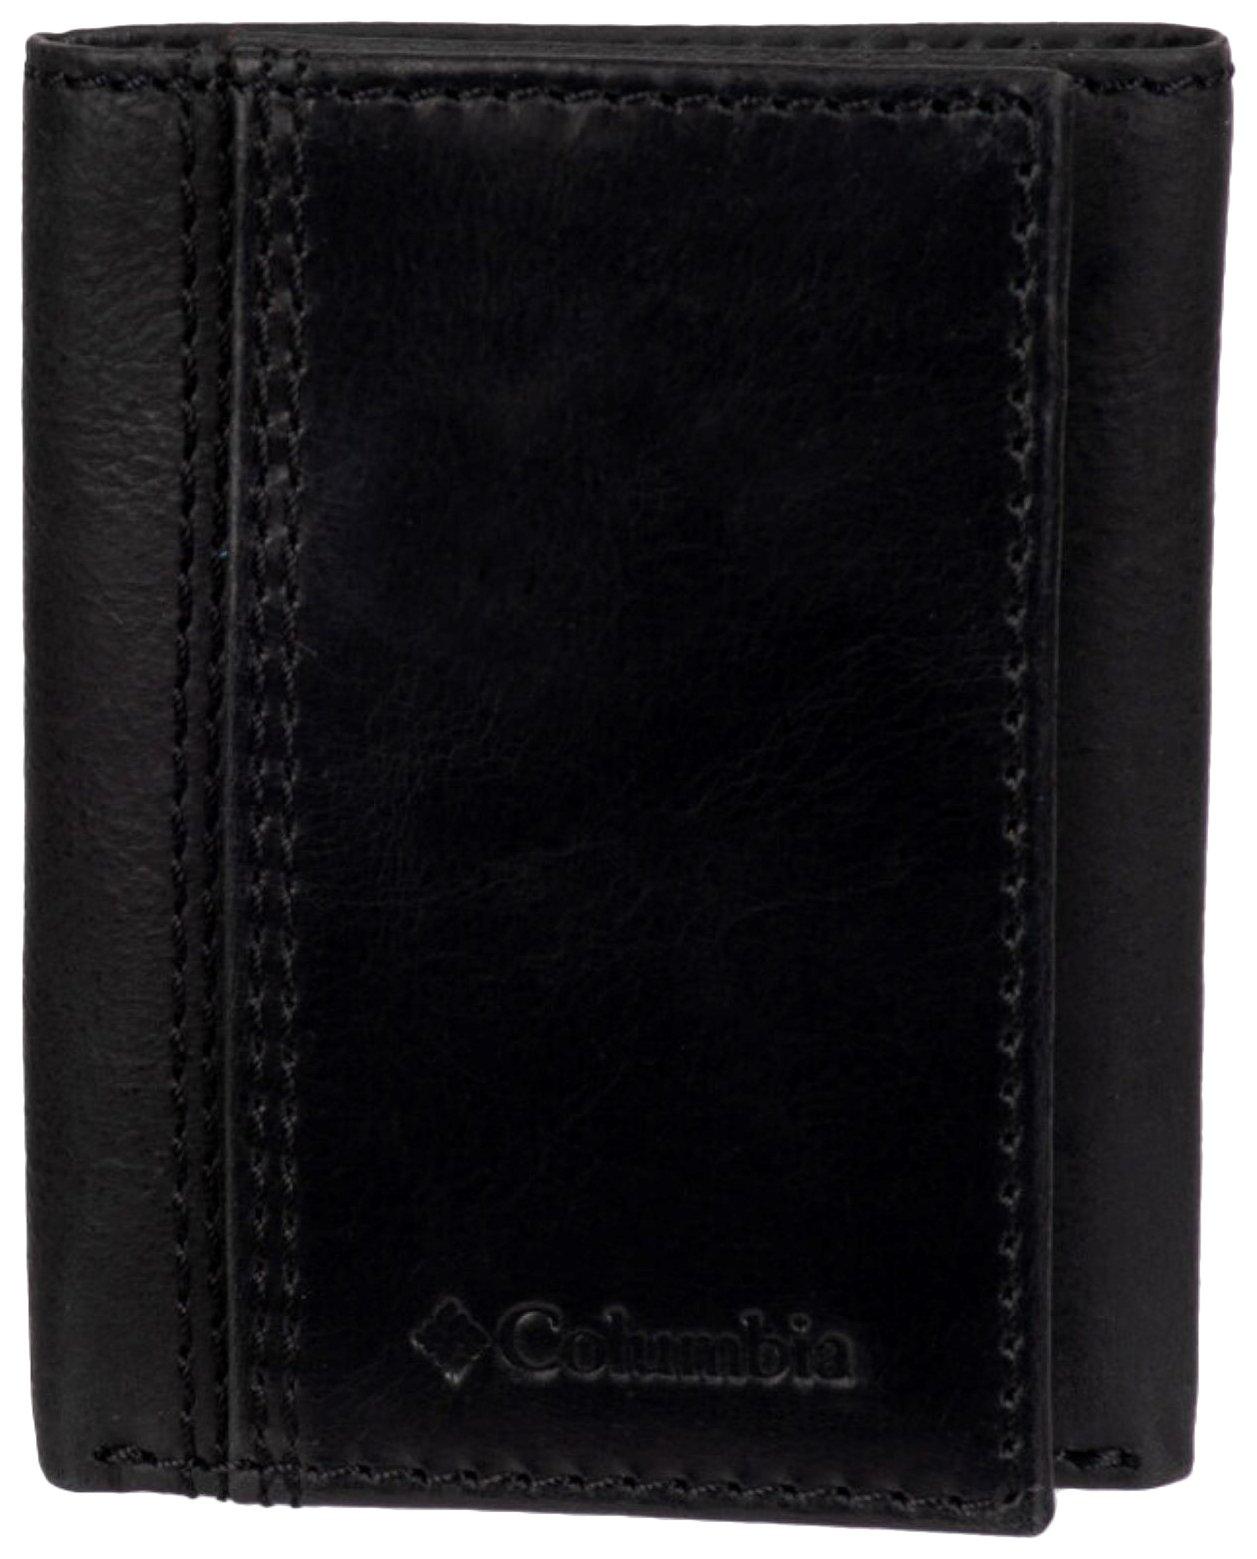 Columbia Mens Extra Capacity RFID Leather Trifold Wallet